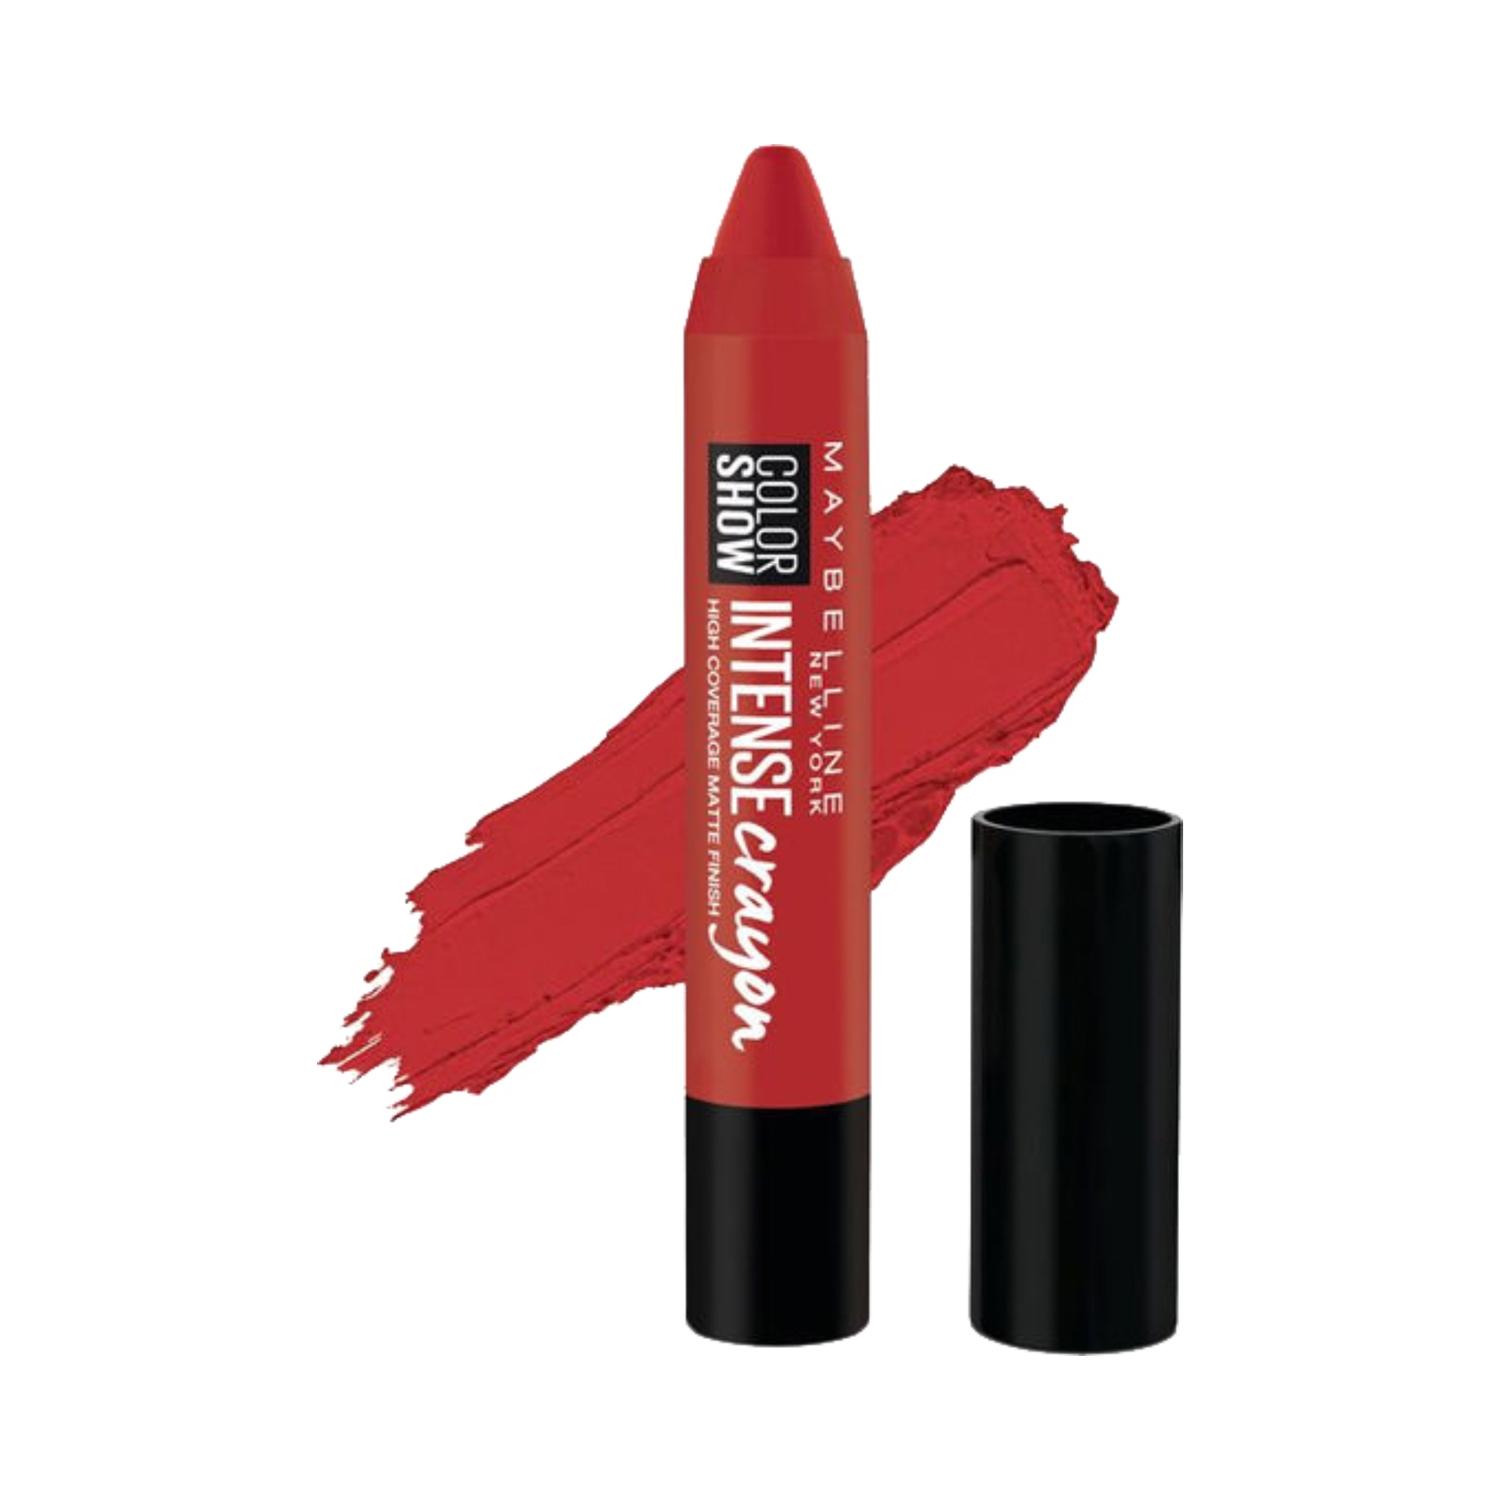 maybelline new york color show intense lip crayon spf 17 - deep coral (3.5g)